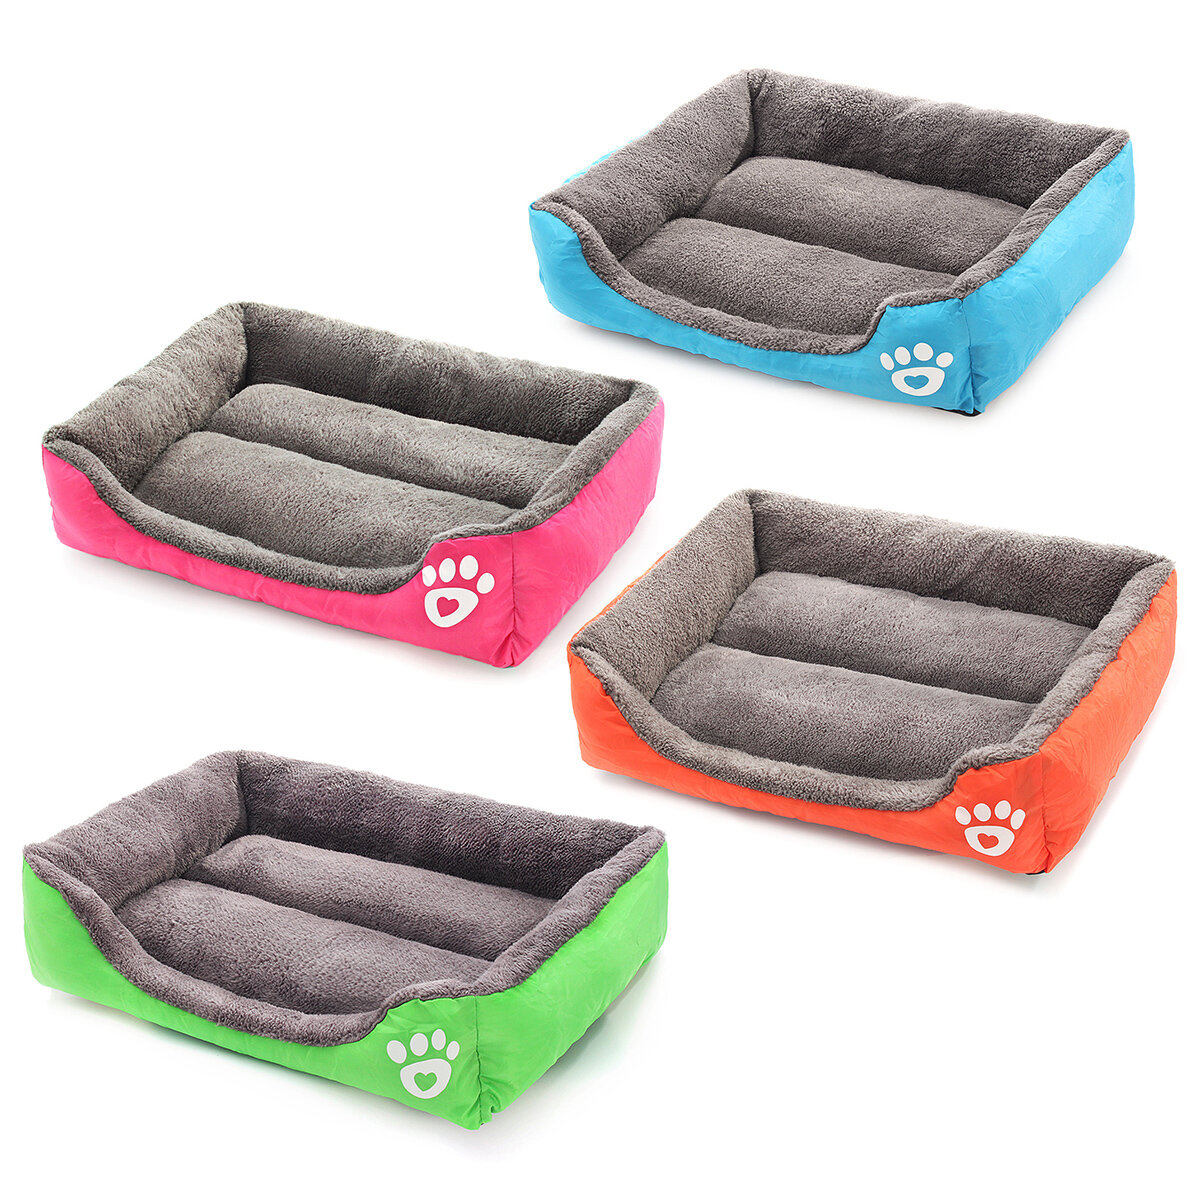 Large Pet Bed Cushion Fabric Pet Bed with Anti-biting Prevent Scratching Wear-resisting Design for C